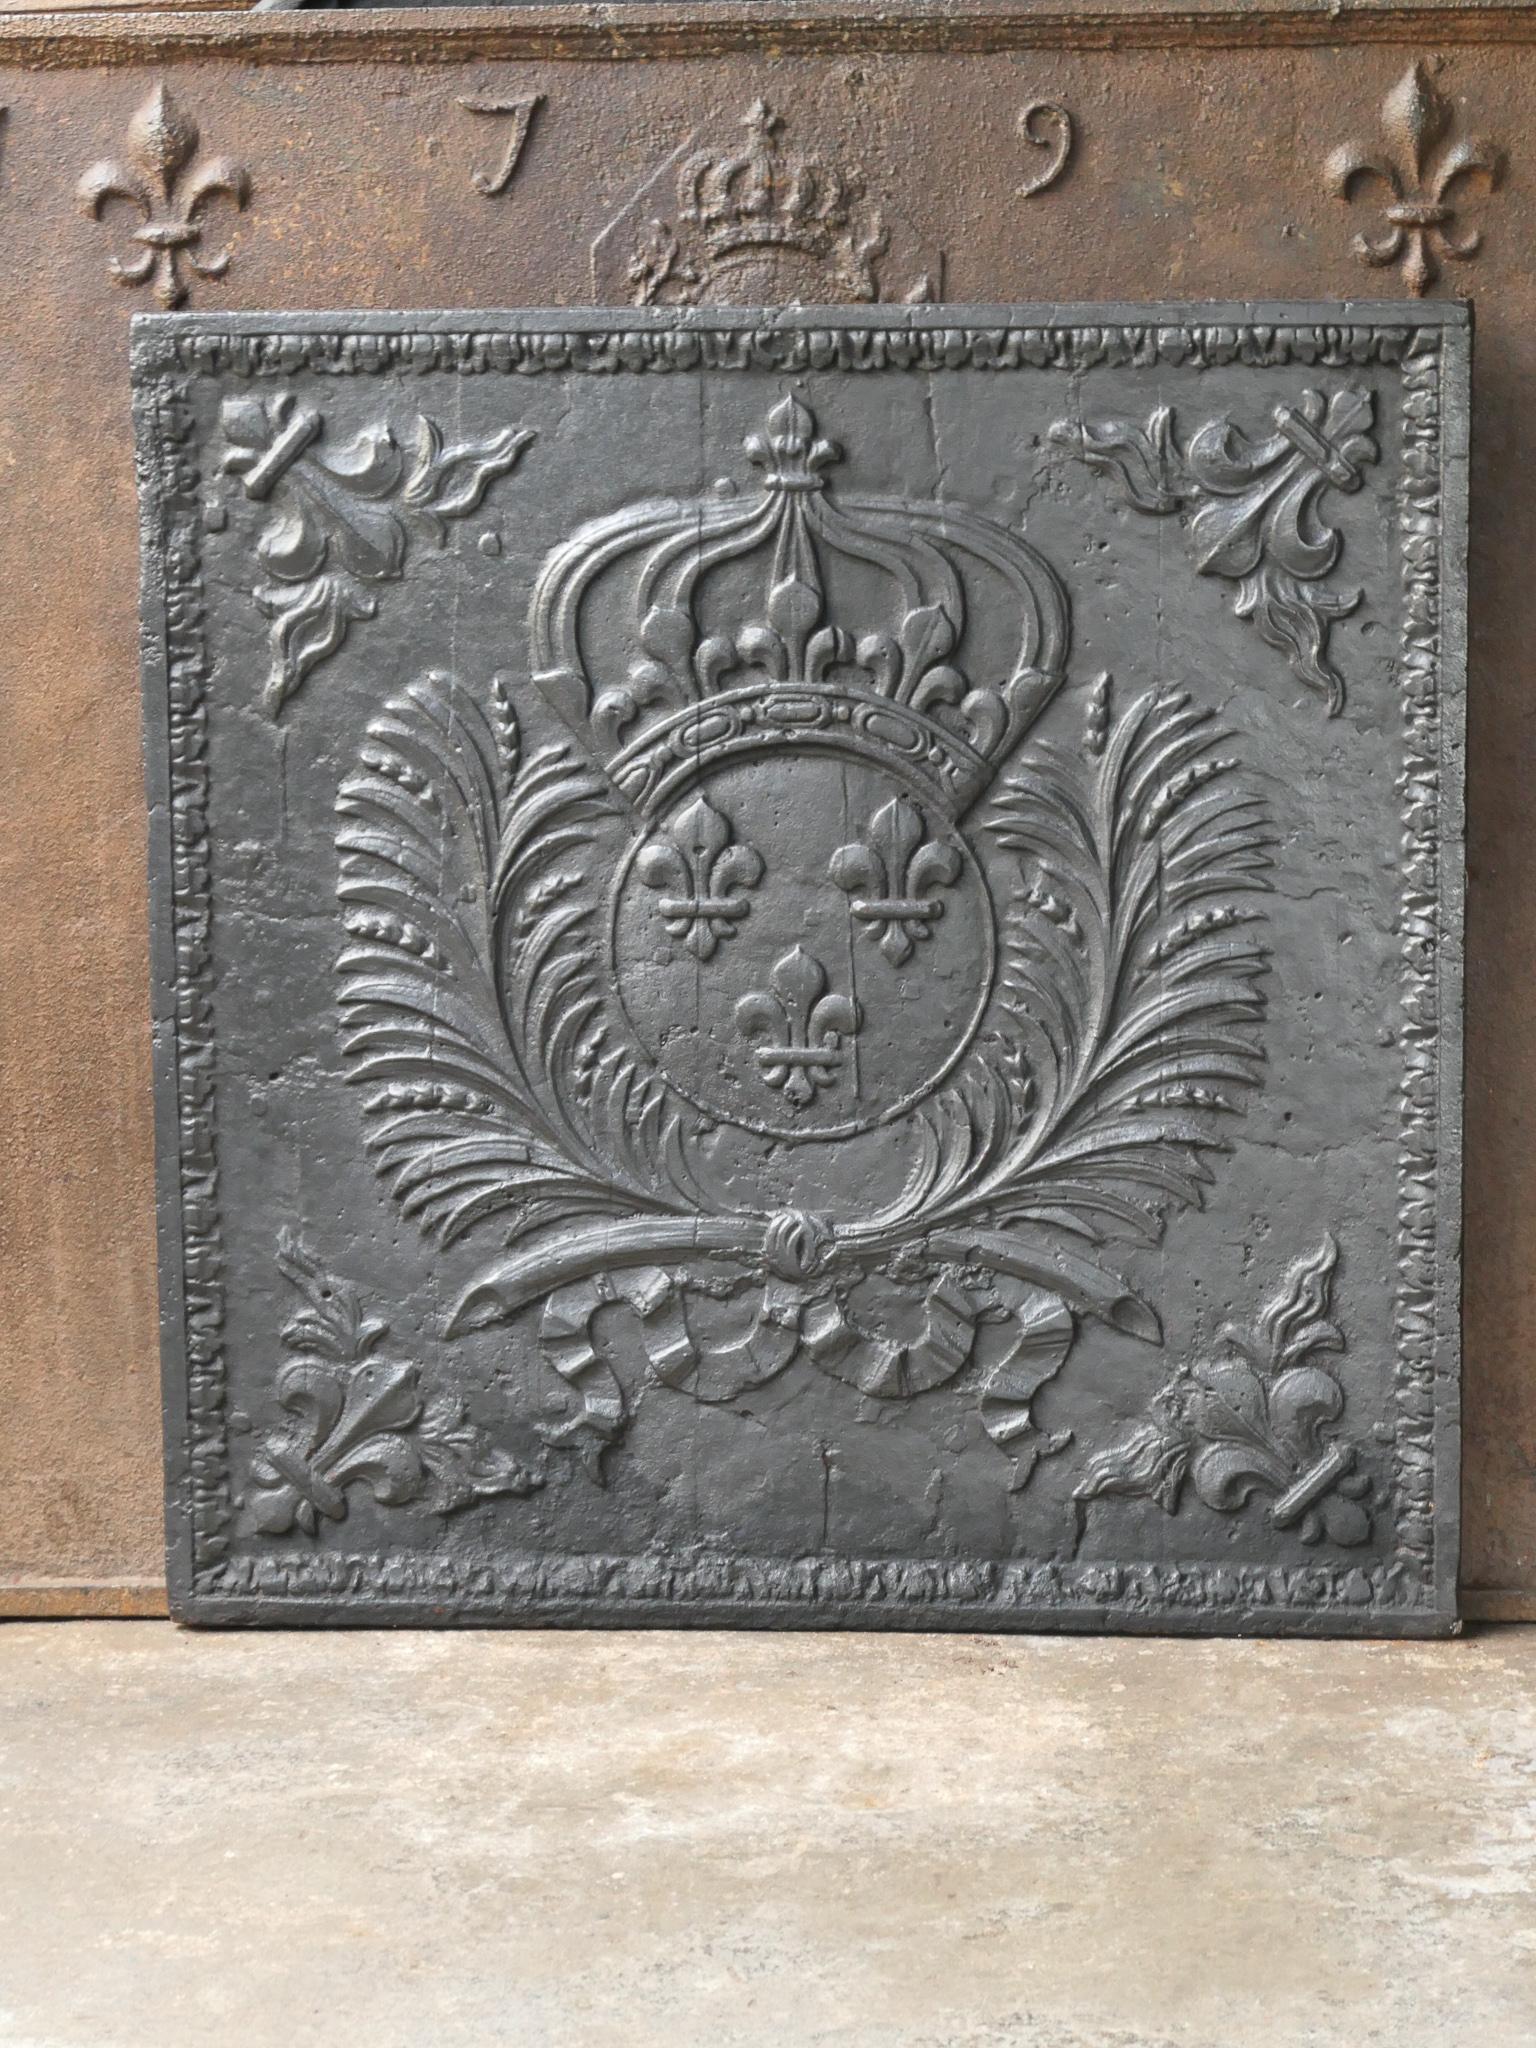 Beautiful 17th century French Louis XIV fireback with the arms of France. This is the coat of arms of the House of Bourbon, an originally French royal house that became a major dynasty in Europe. It delivered kings for Spain (Navarra), France, both